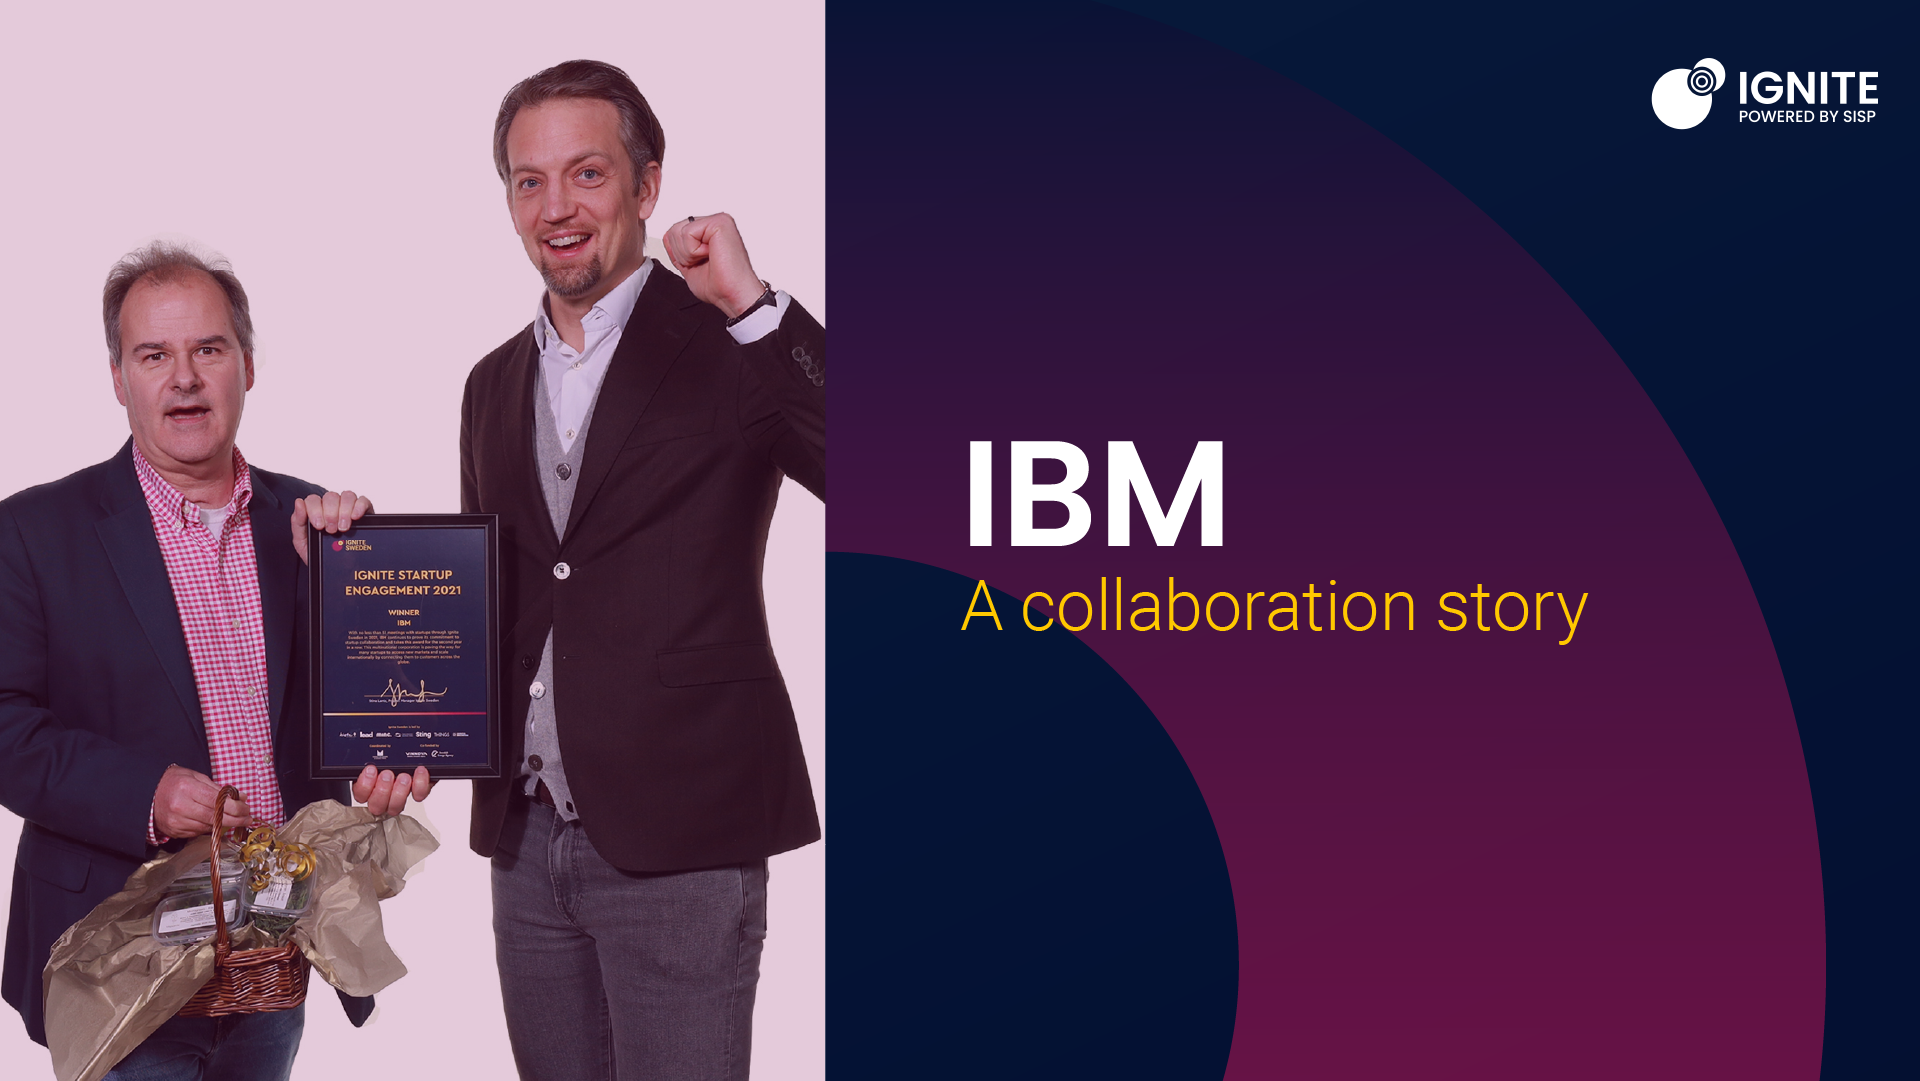 IBM winners of 2021 award celebrating on a banner with Ignite colours and text IBM - A collaboration story